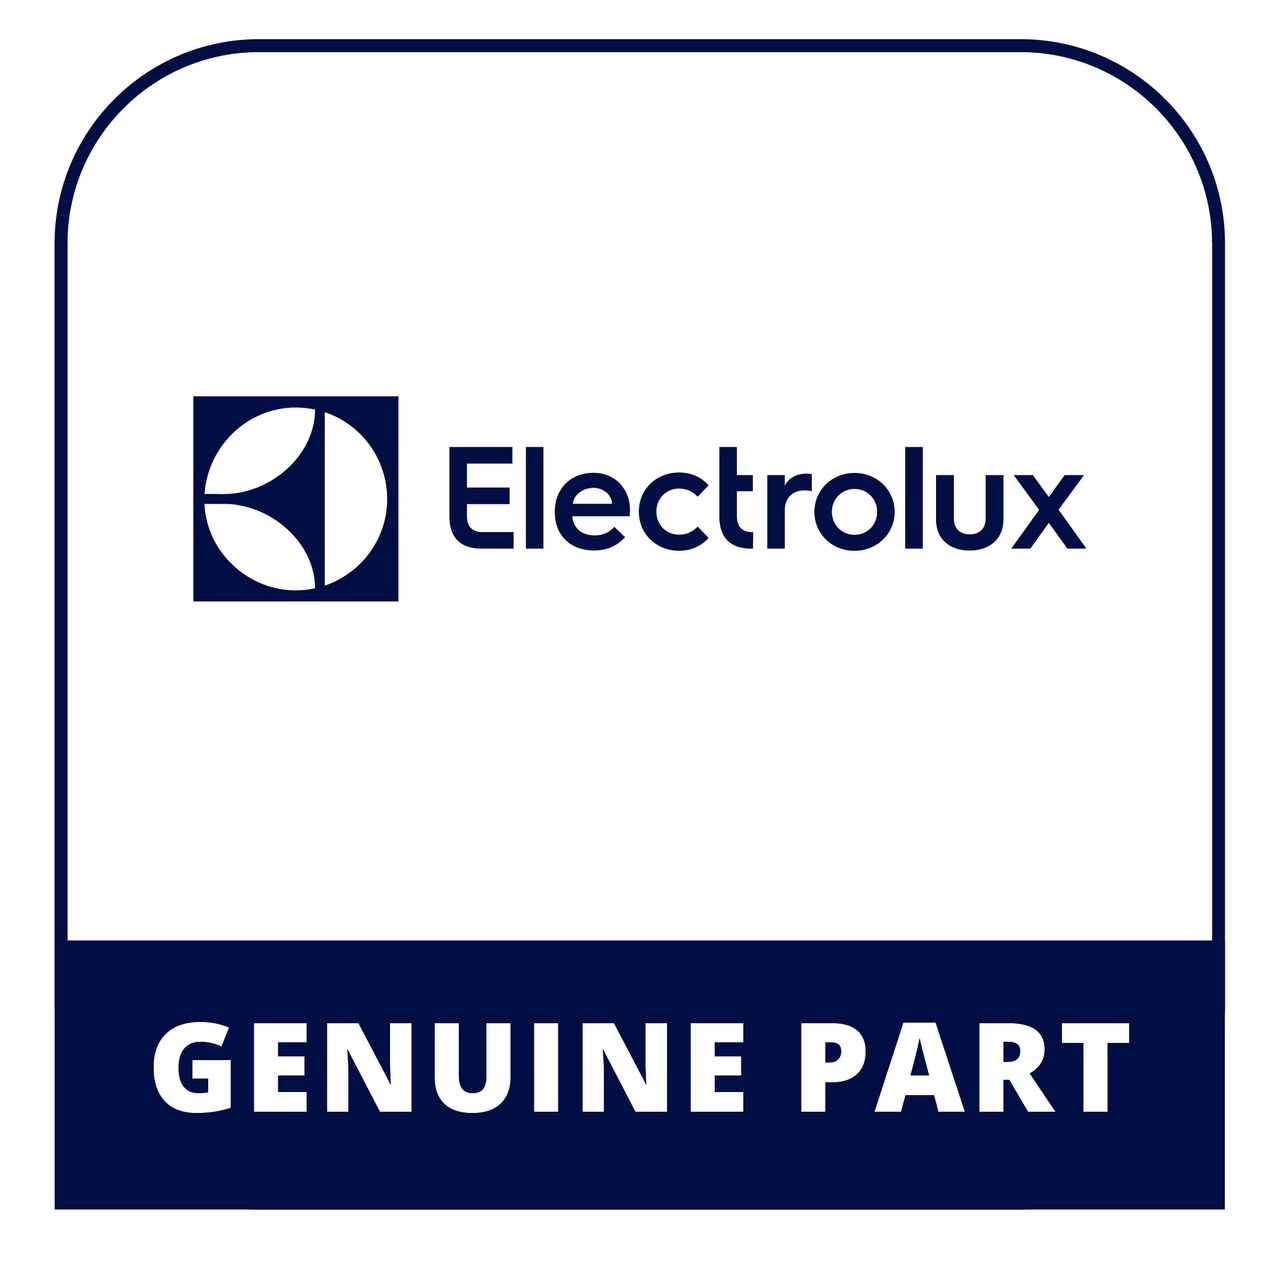 Frigidaire - Electrolux 5304491492 Support - Genuine Electrolux Part